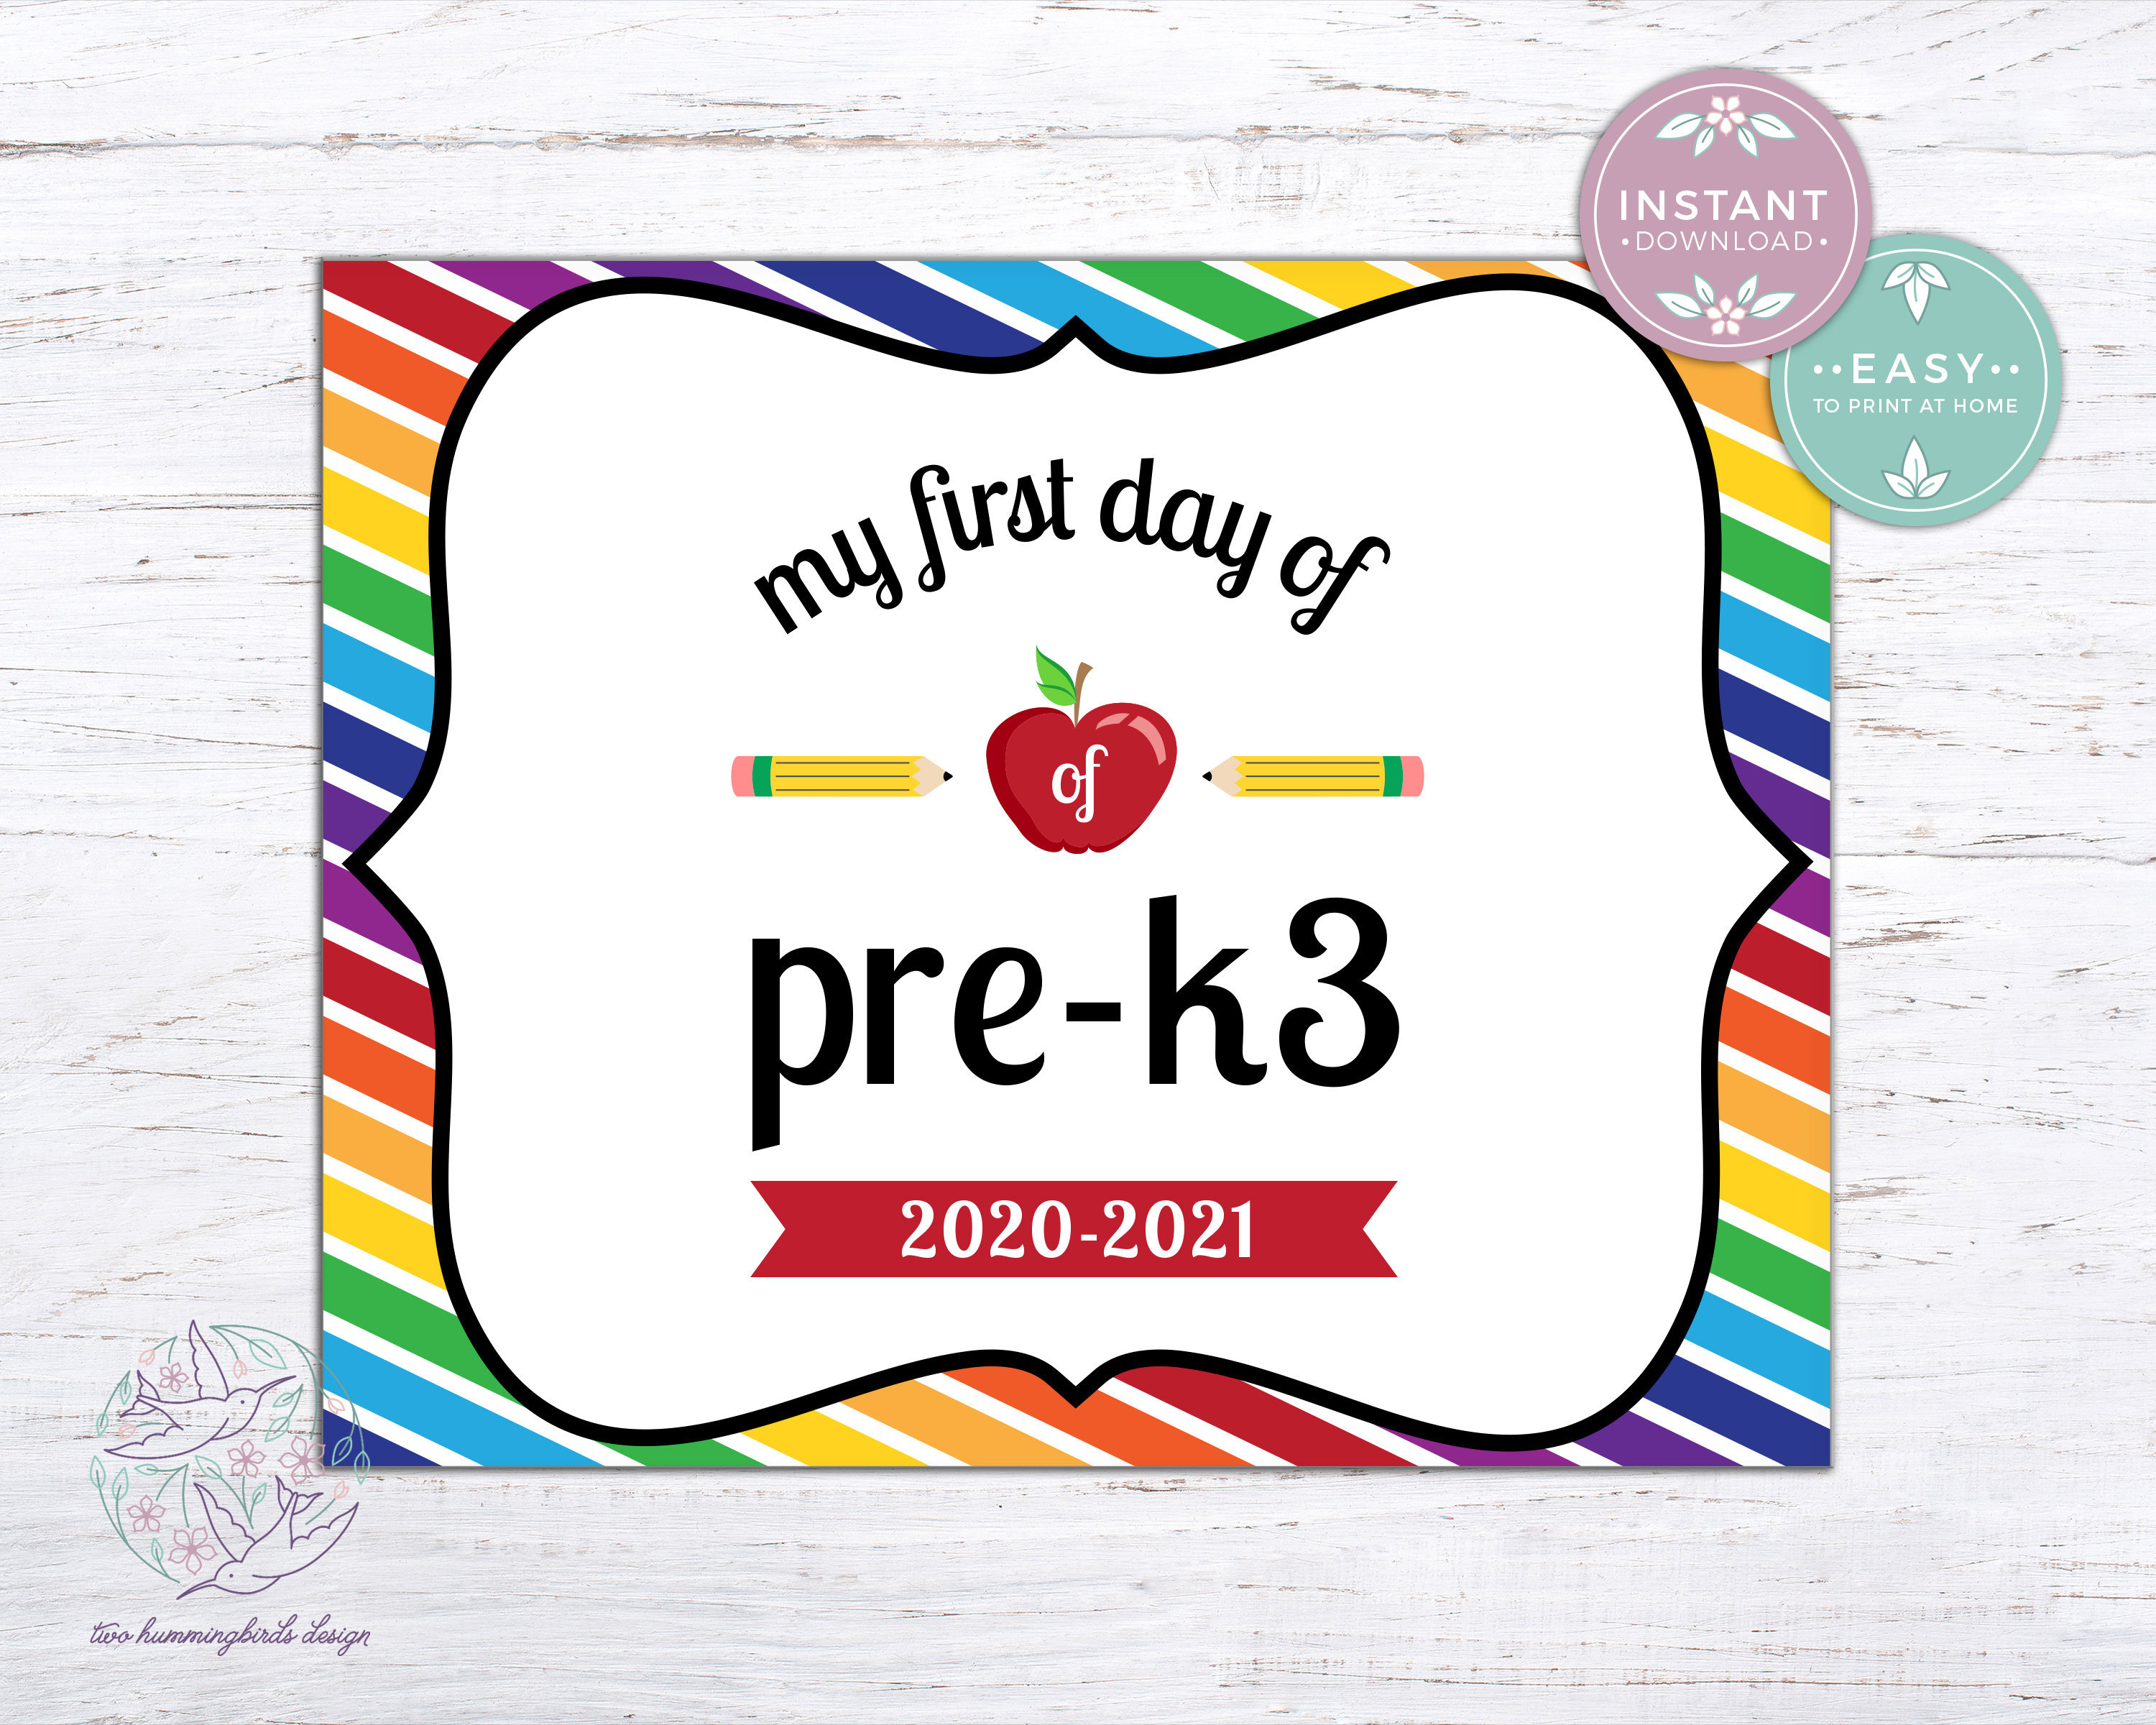 first-day-of-pre-k3-school-printable-sign-digital-download-etsy